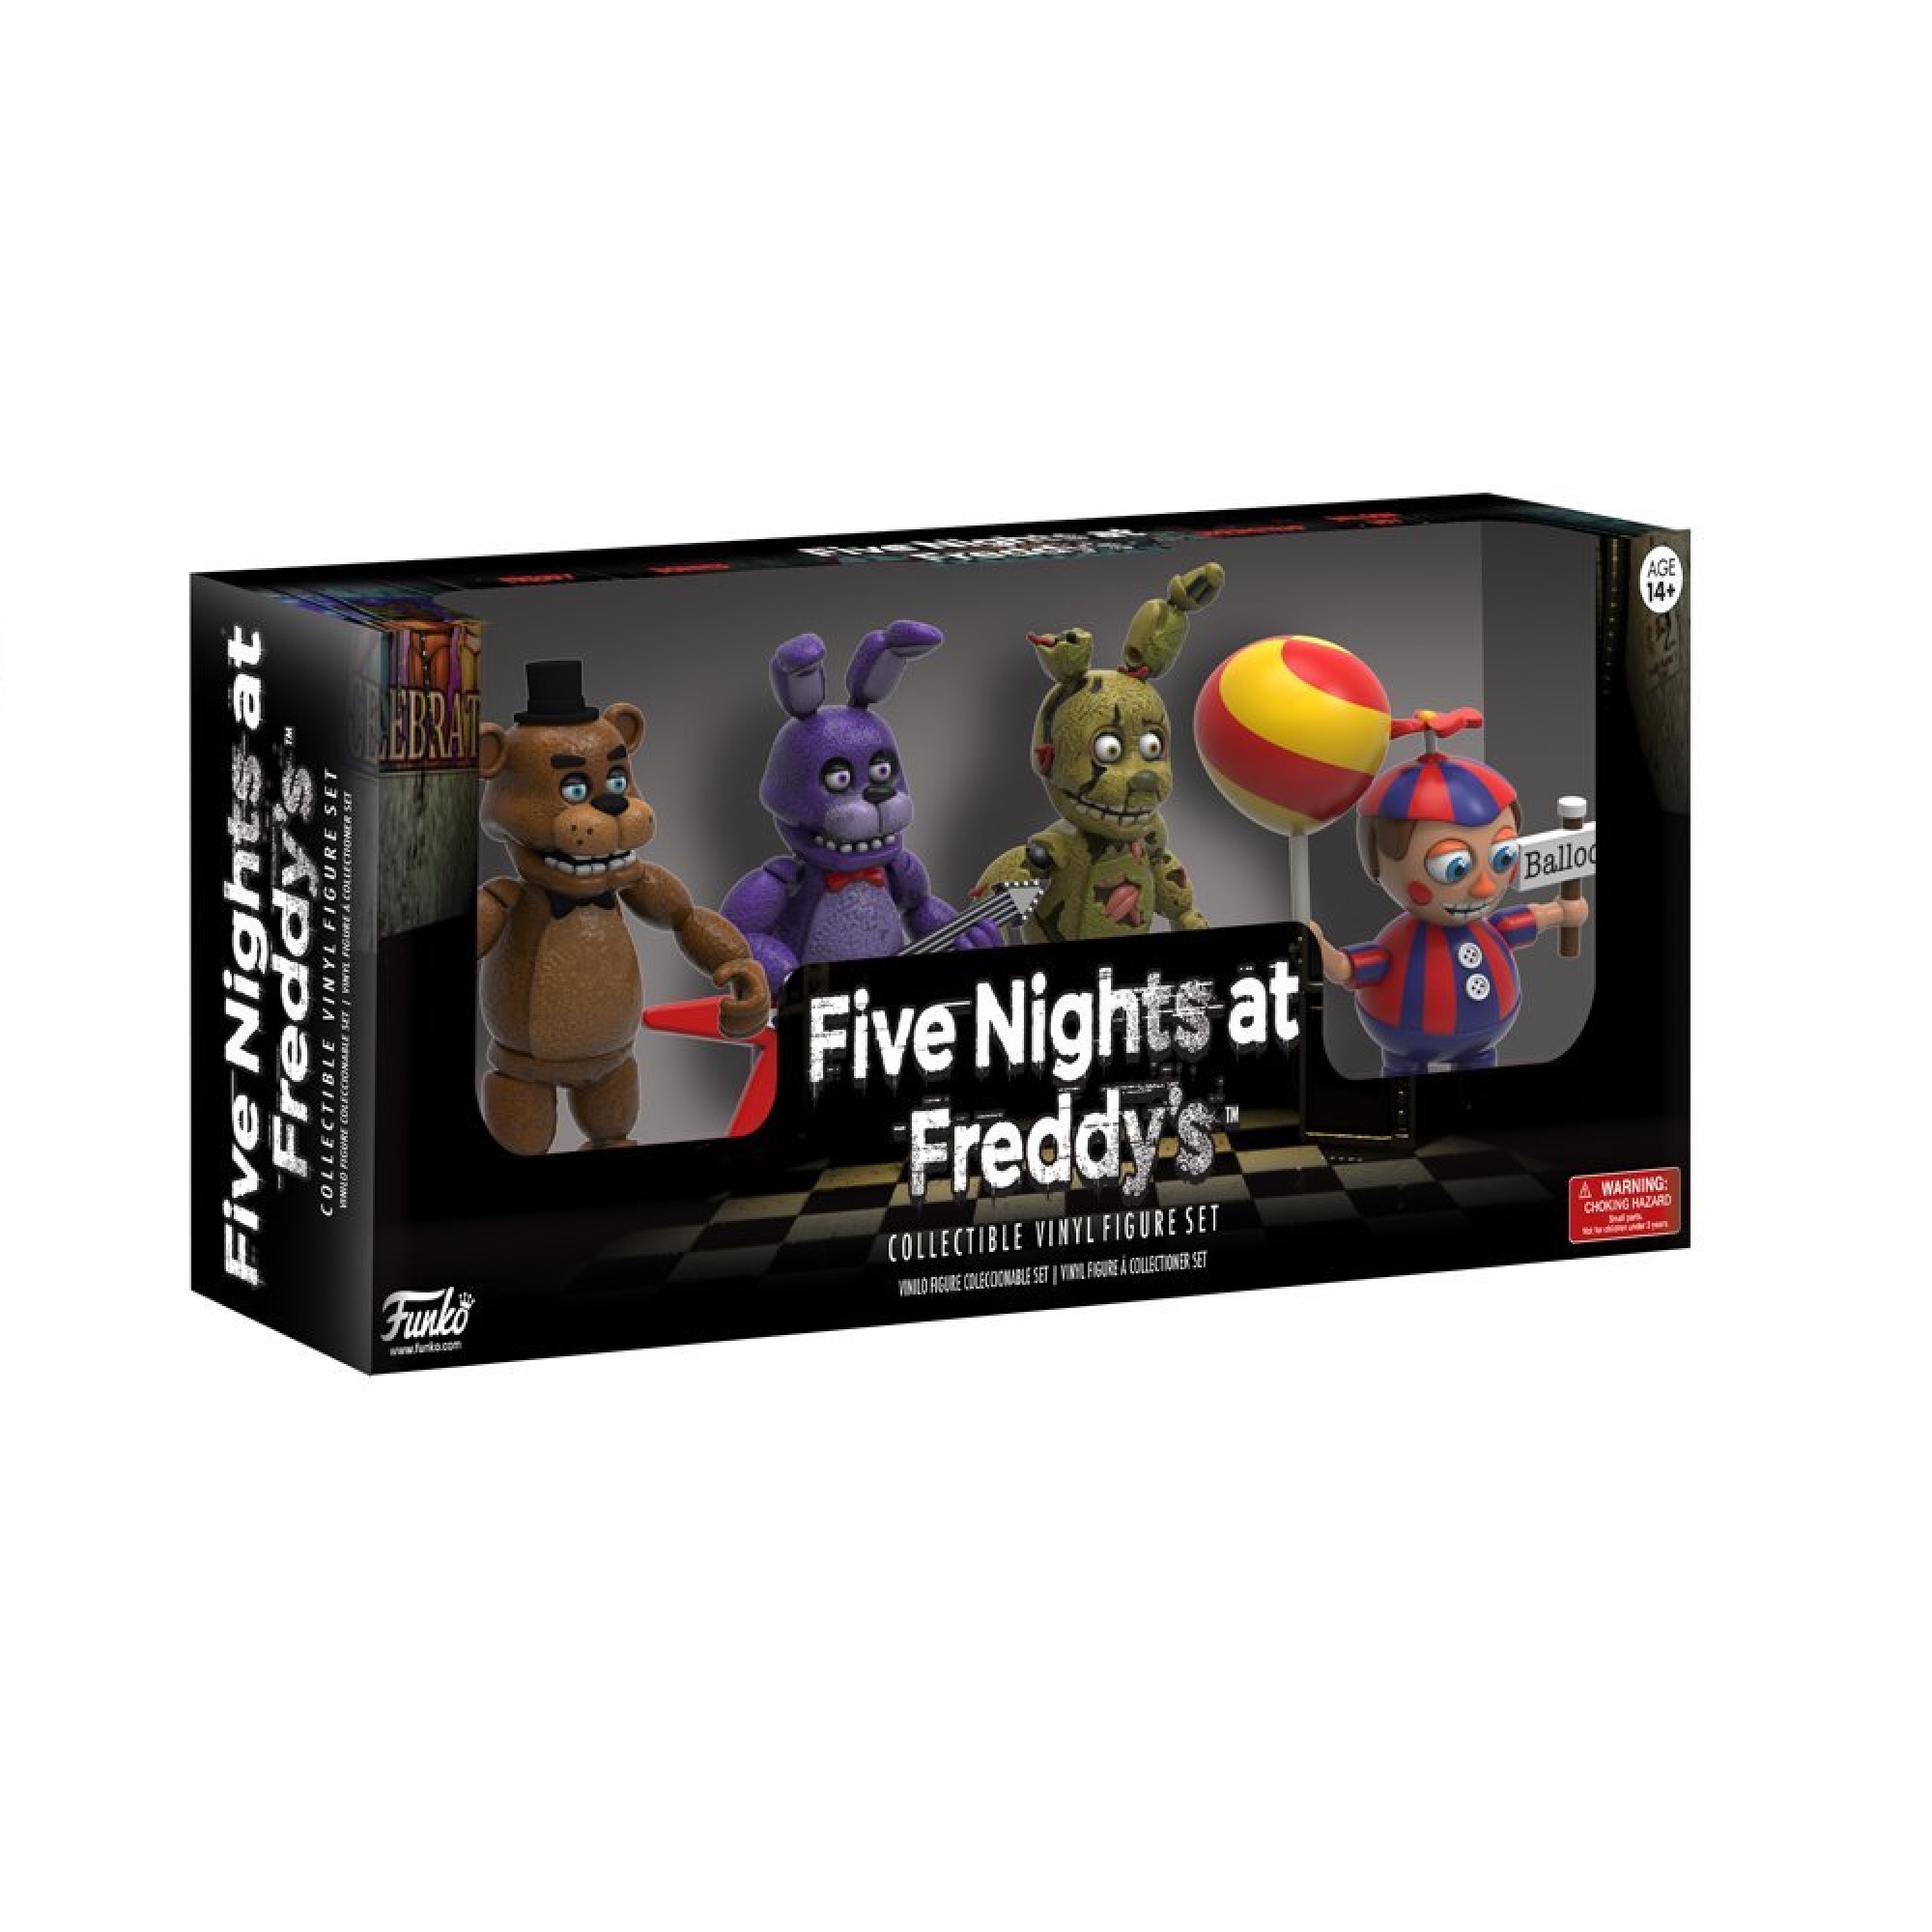 Funko Five Nights at Freddy's 4 Figure Pack (Set 2), 2-Inch - image 2 of 3